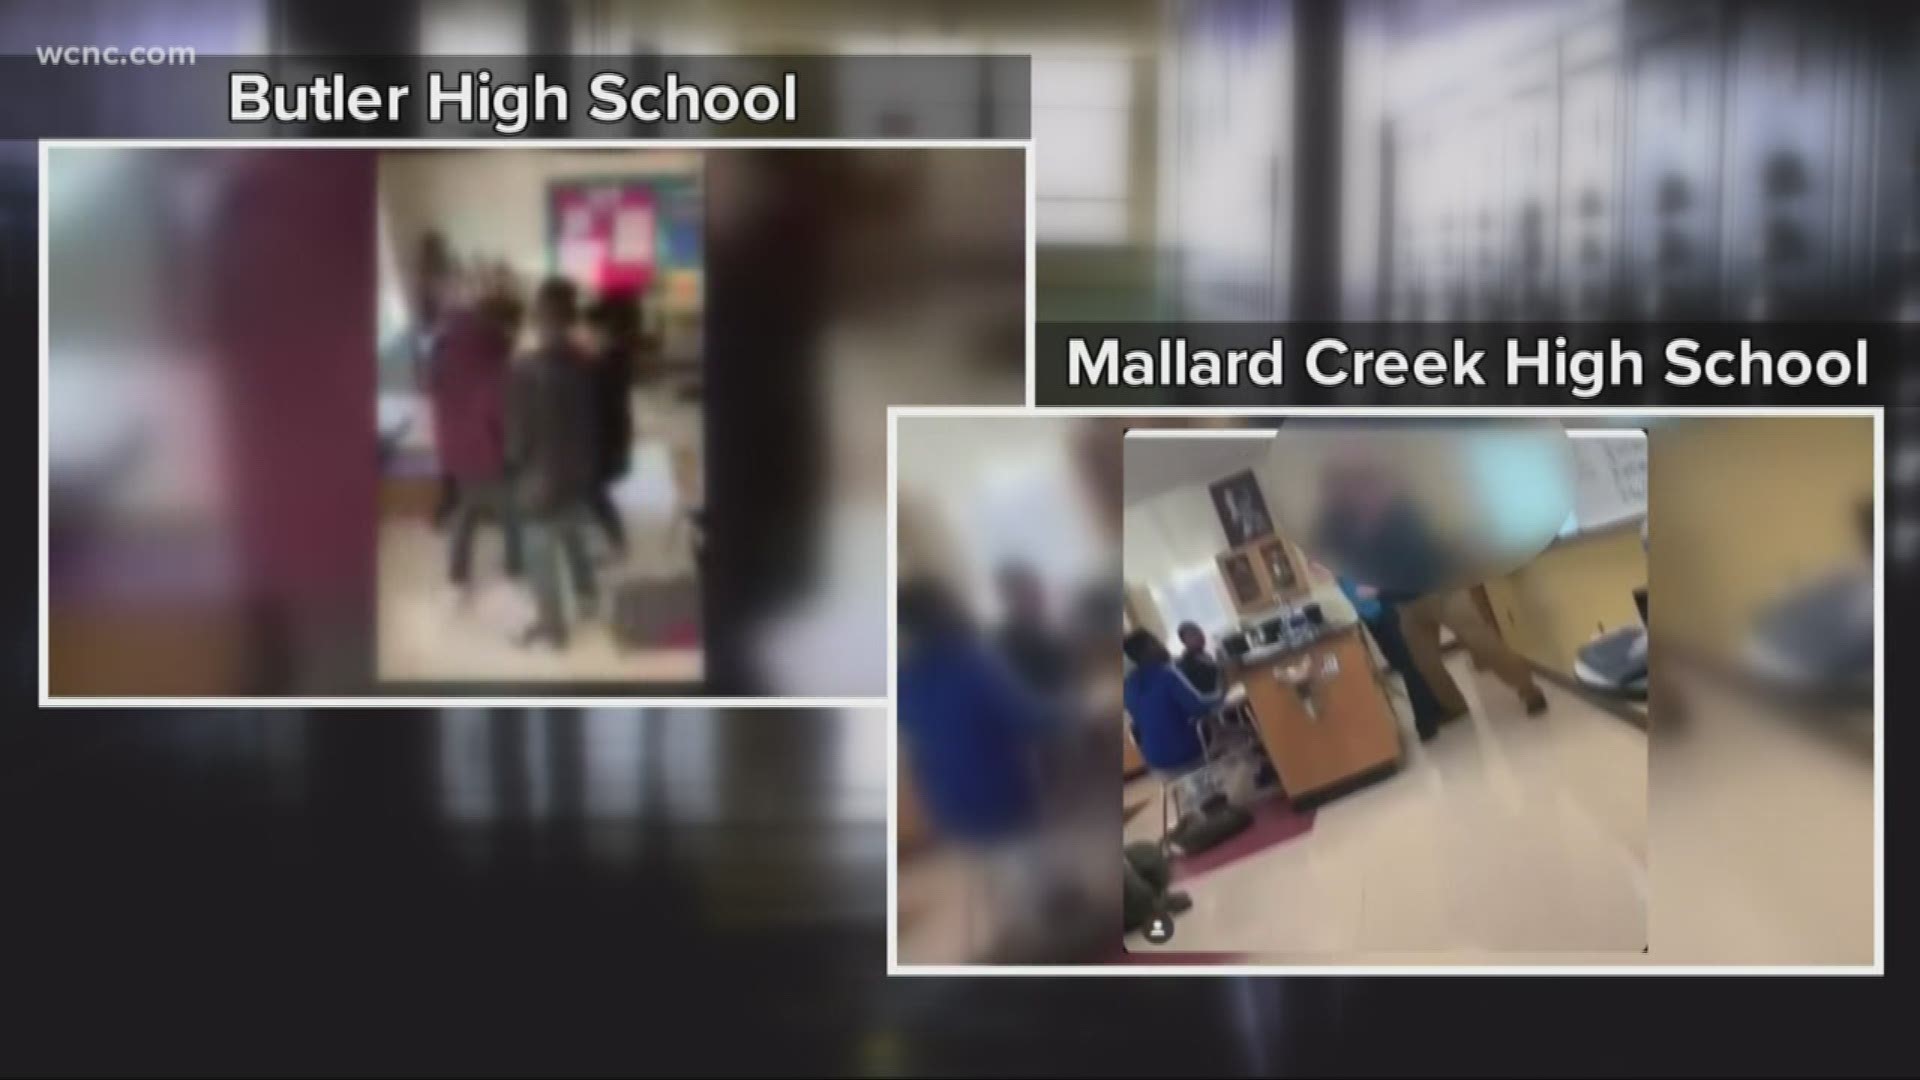 There have been two incidents in the past few days where students and teachers have been caught on camera fighting.